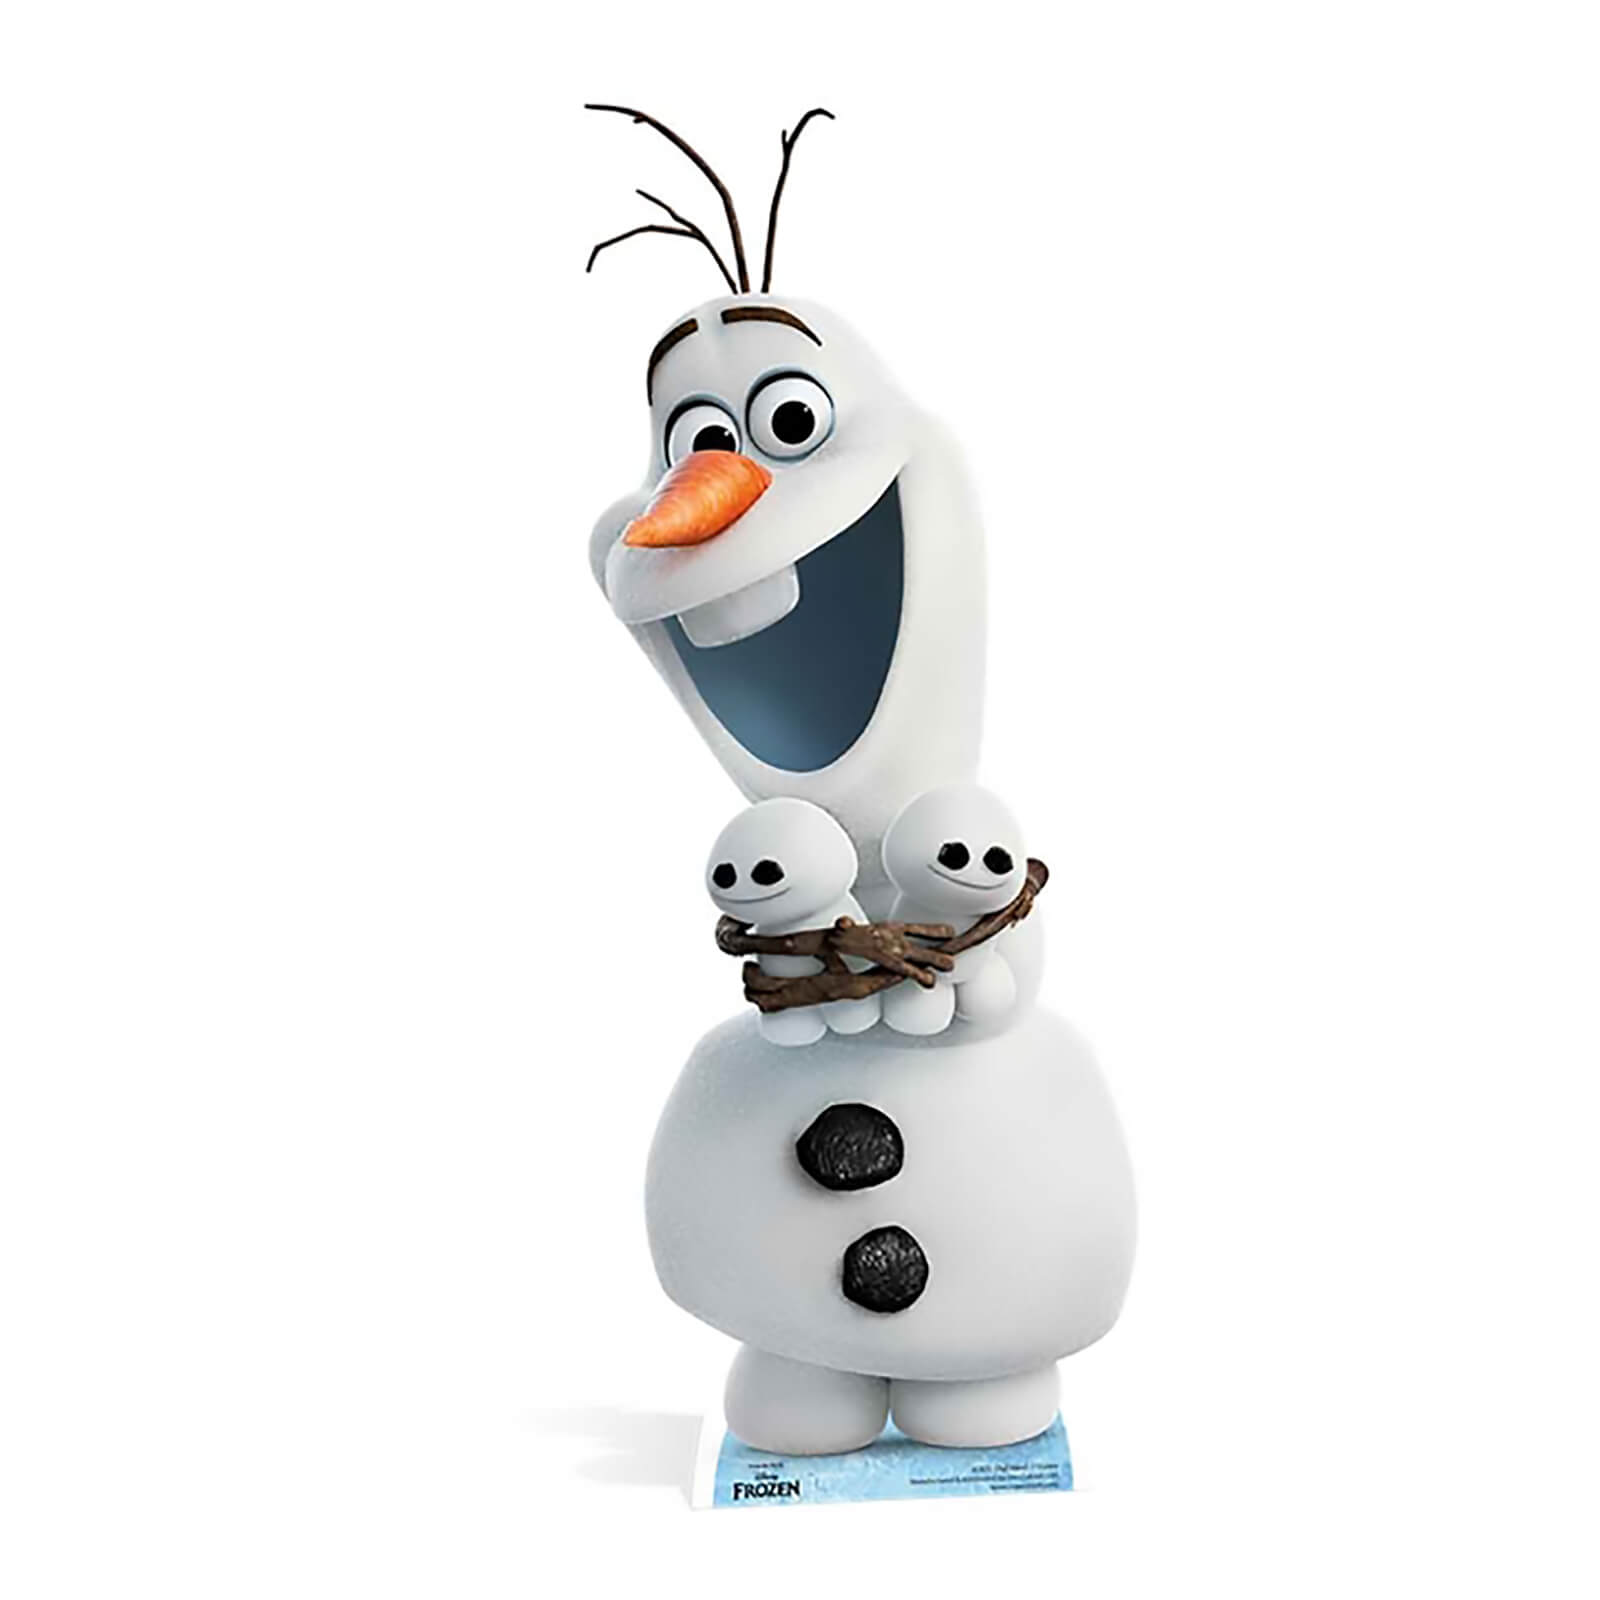 Frozen - Olaf With Friends Carboard Cut Out